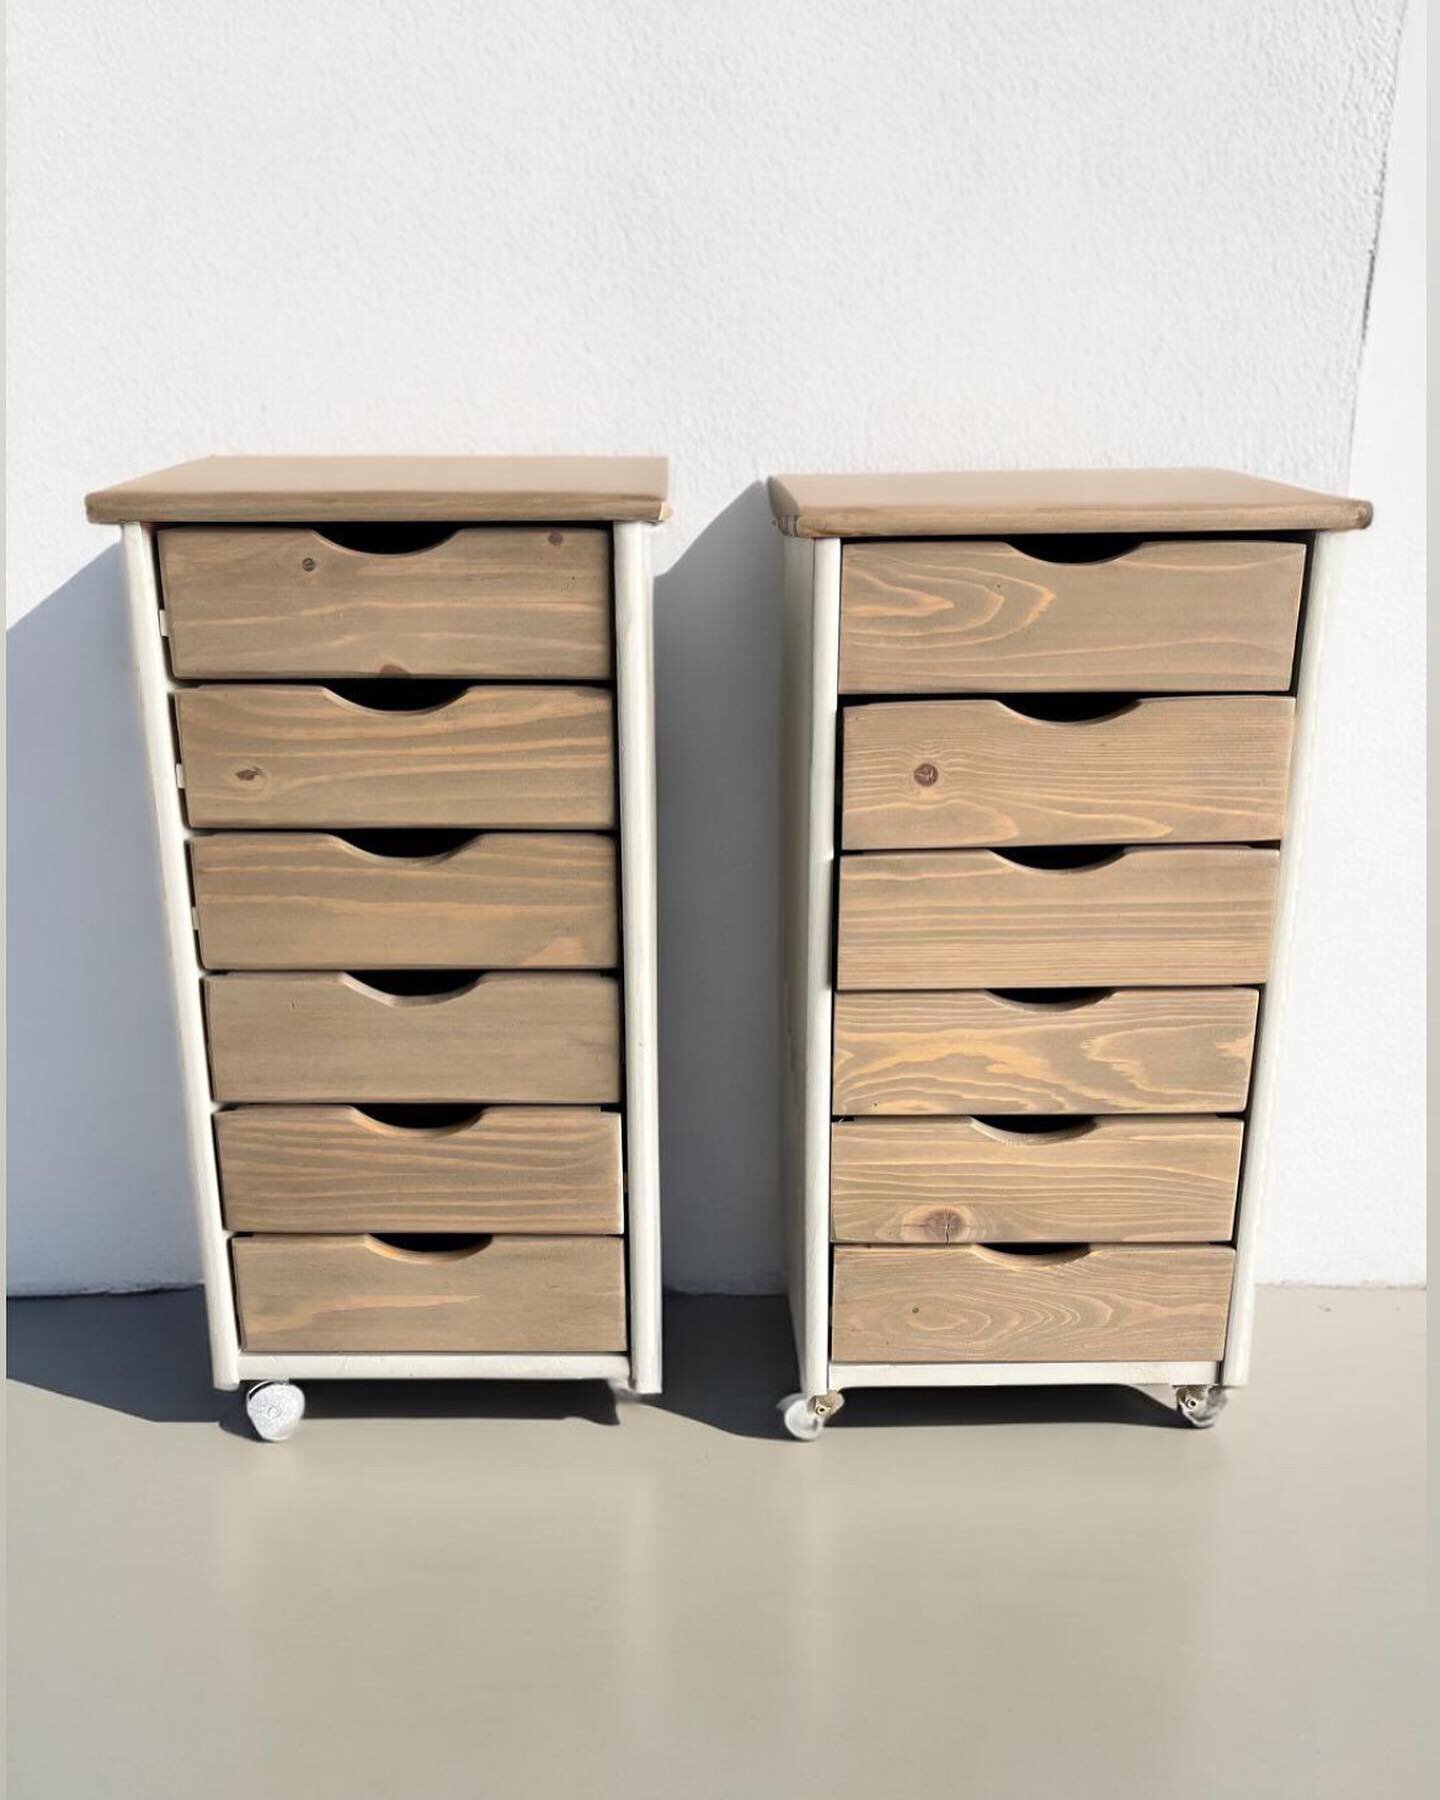 After &amp; Before! How cute are these?!

I flipped these little drawers for one of my favorite aunties to coordinate with a dining set I refinished for her too, as these will be close in proximity in her home &amp; the coordination will help spaces 